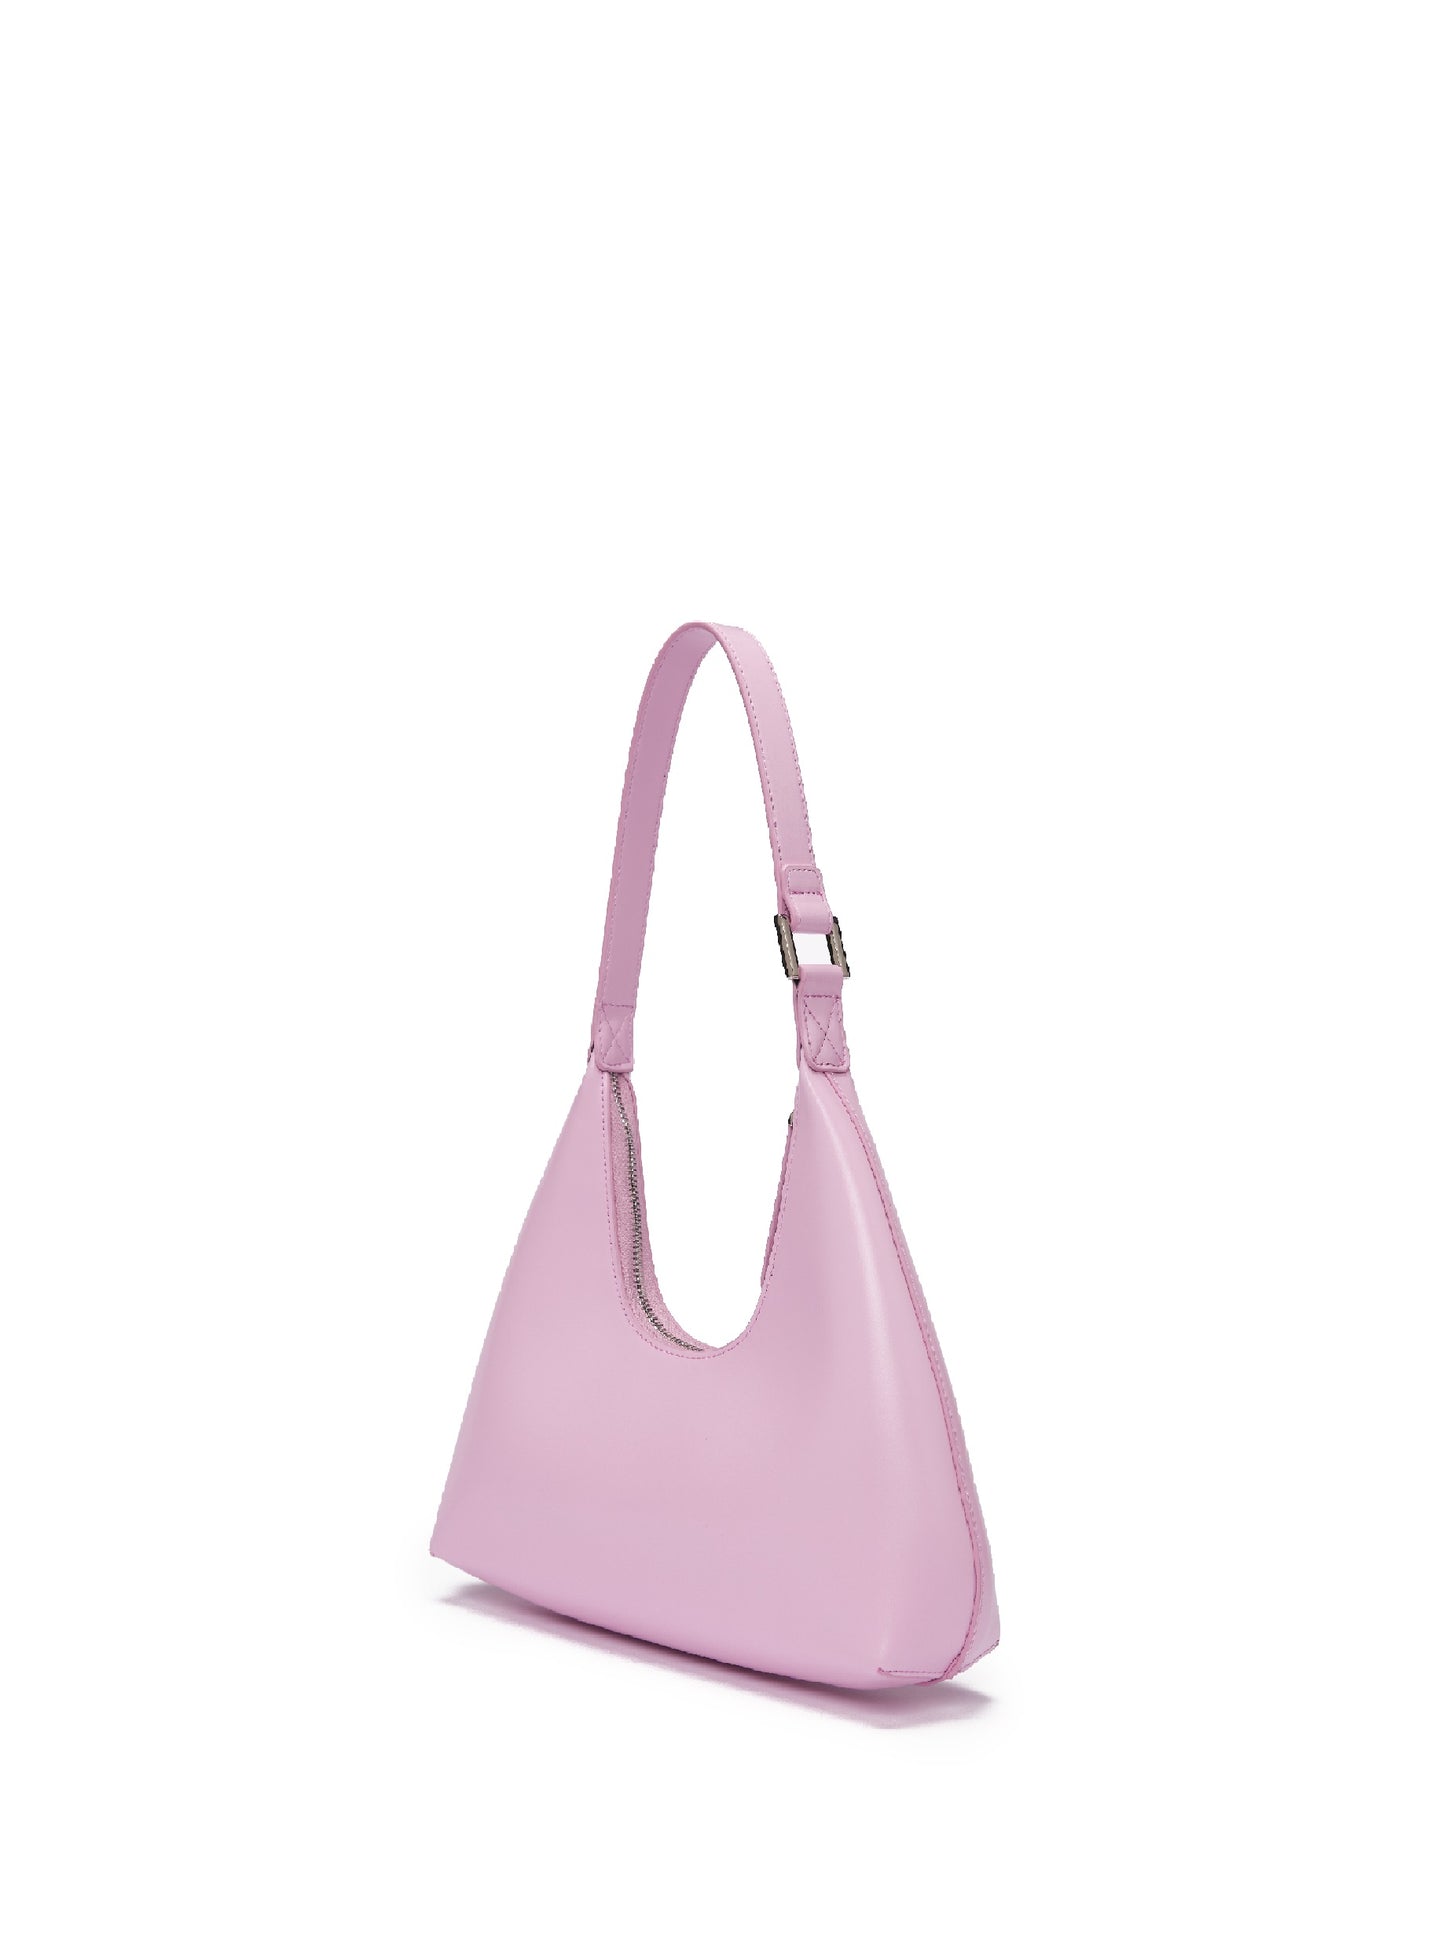 Alexia Bag in Smooth Leather, Pink